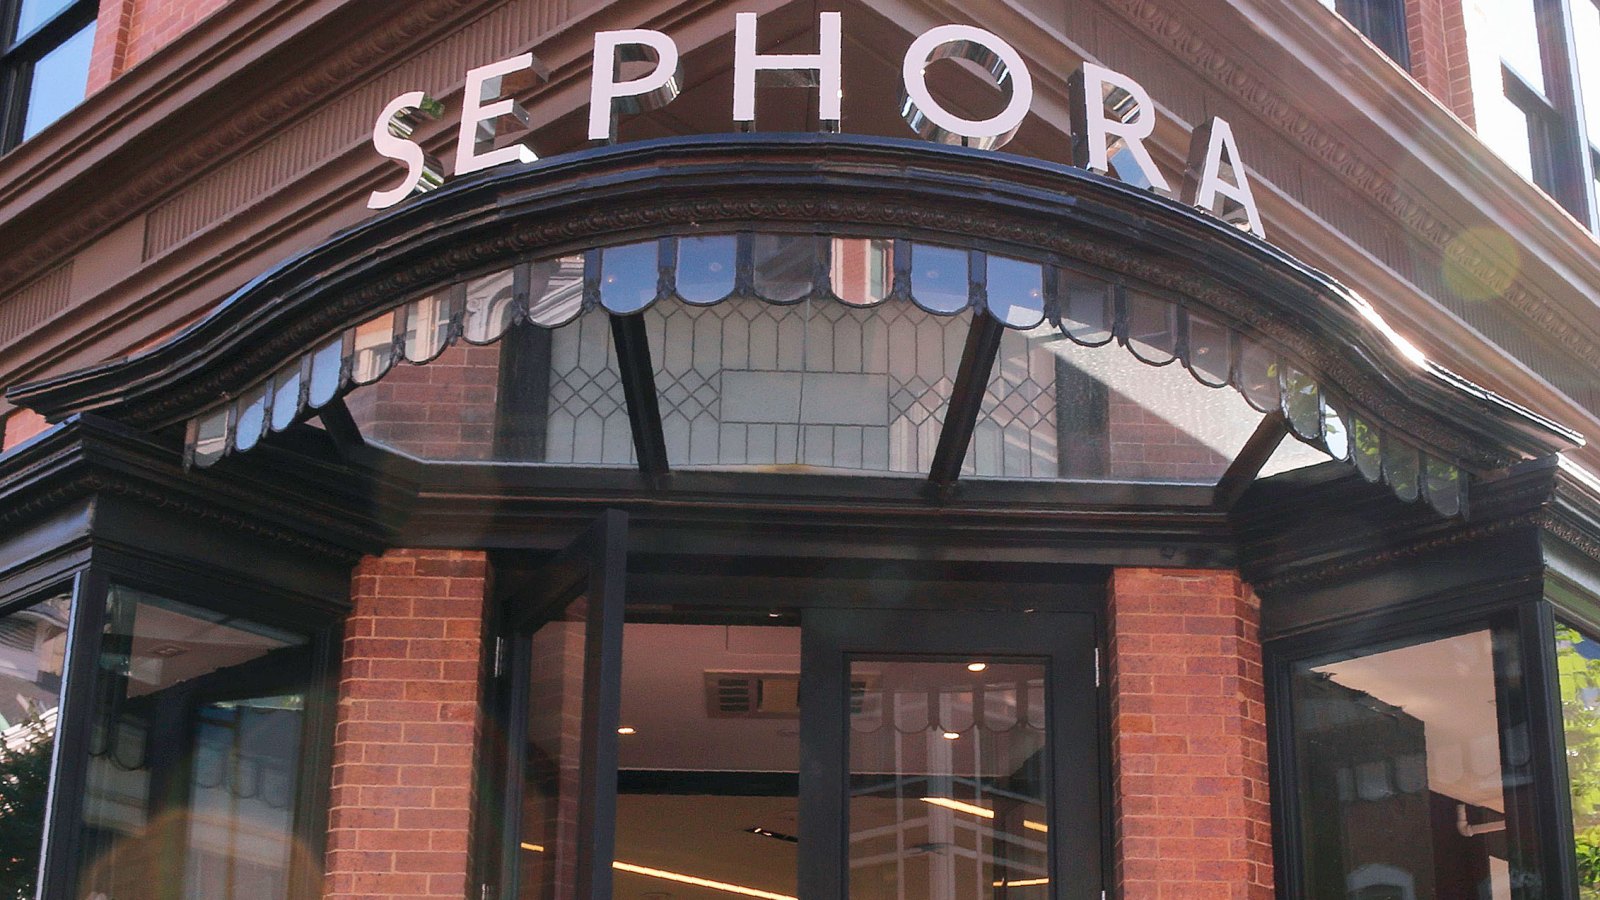 Sephora 34th Street: How to Shop the Company's Largest Store in the U.S.